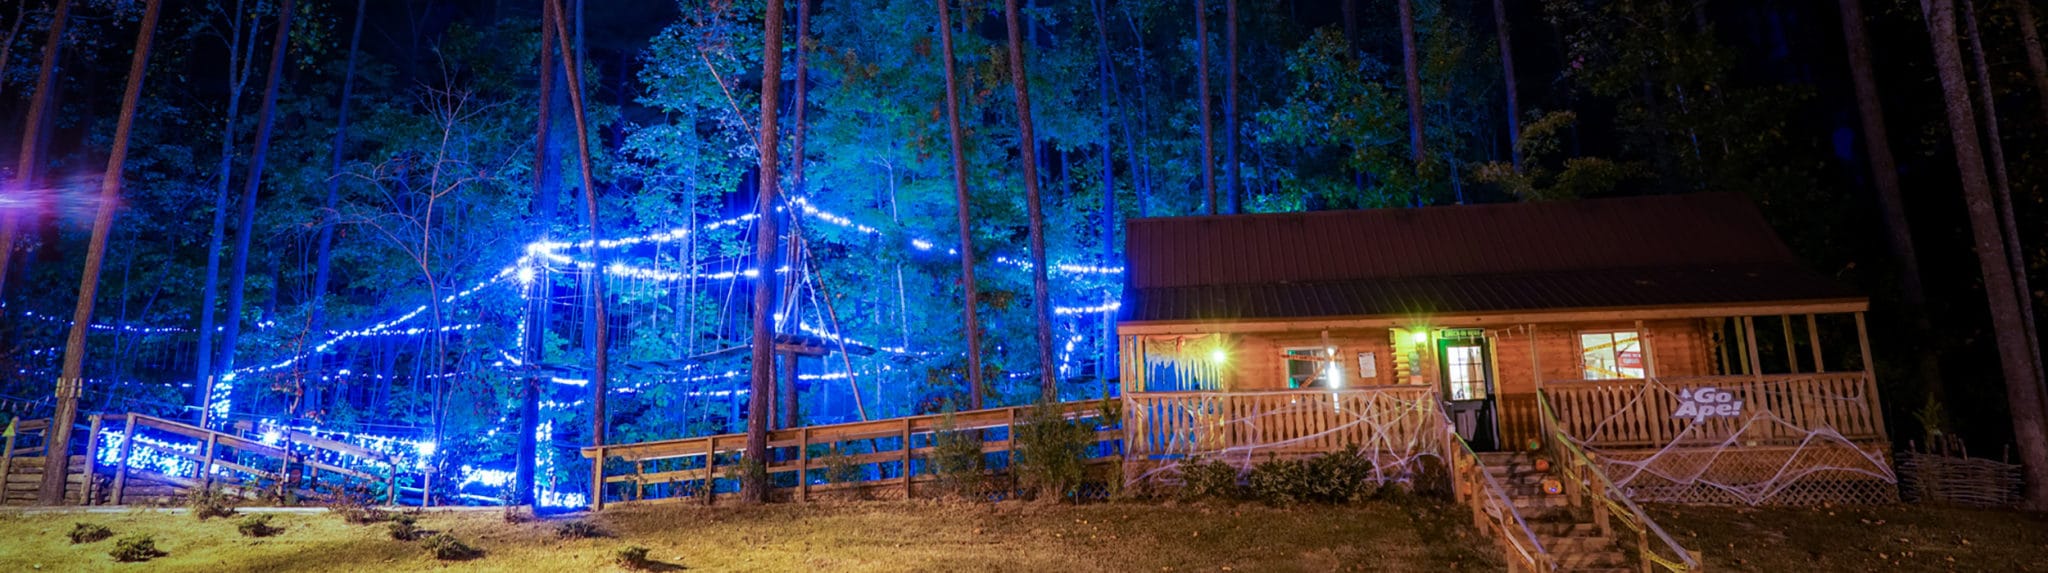 Go Ape cabin covered in fake spider webs next to a Treetop Journey course brightly lit by blue lights after sundown